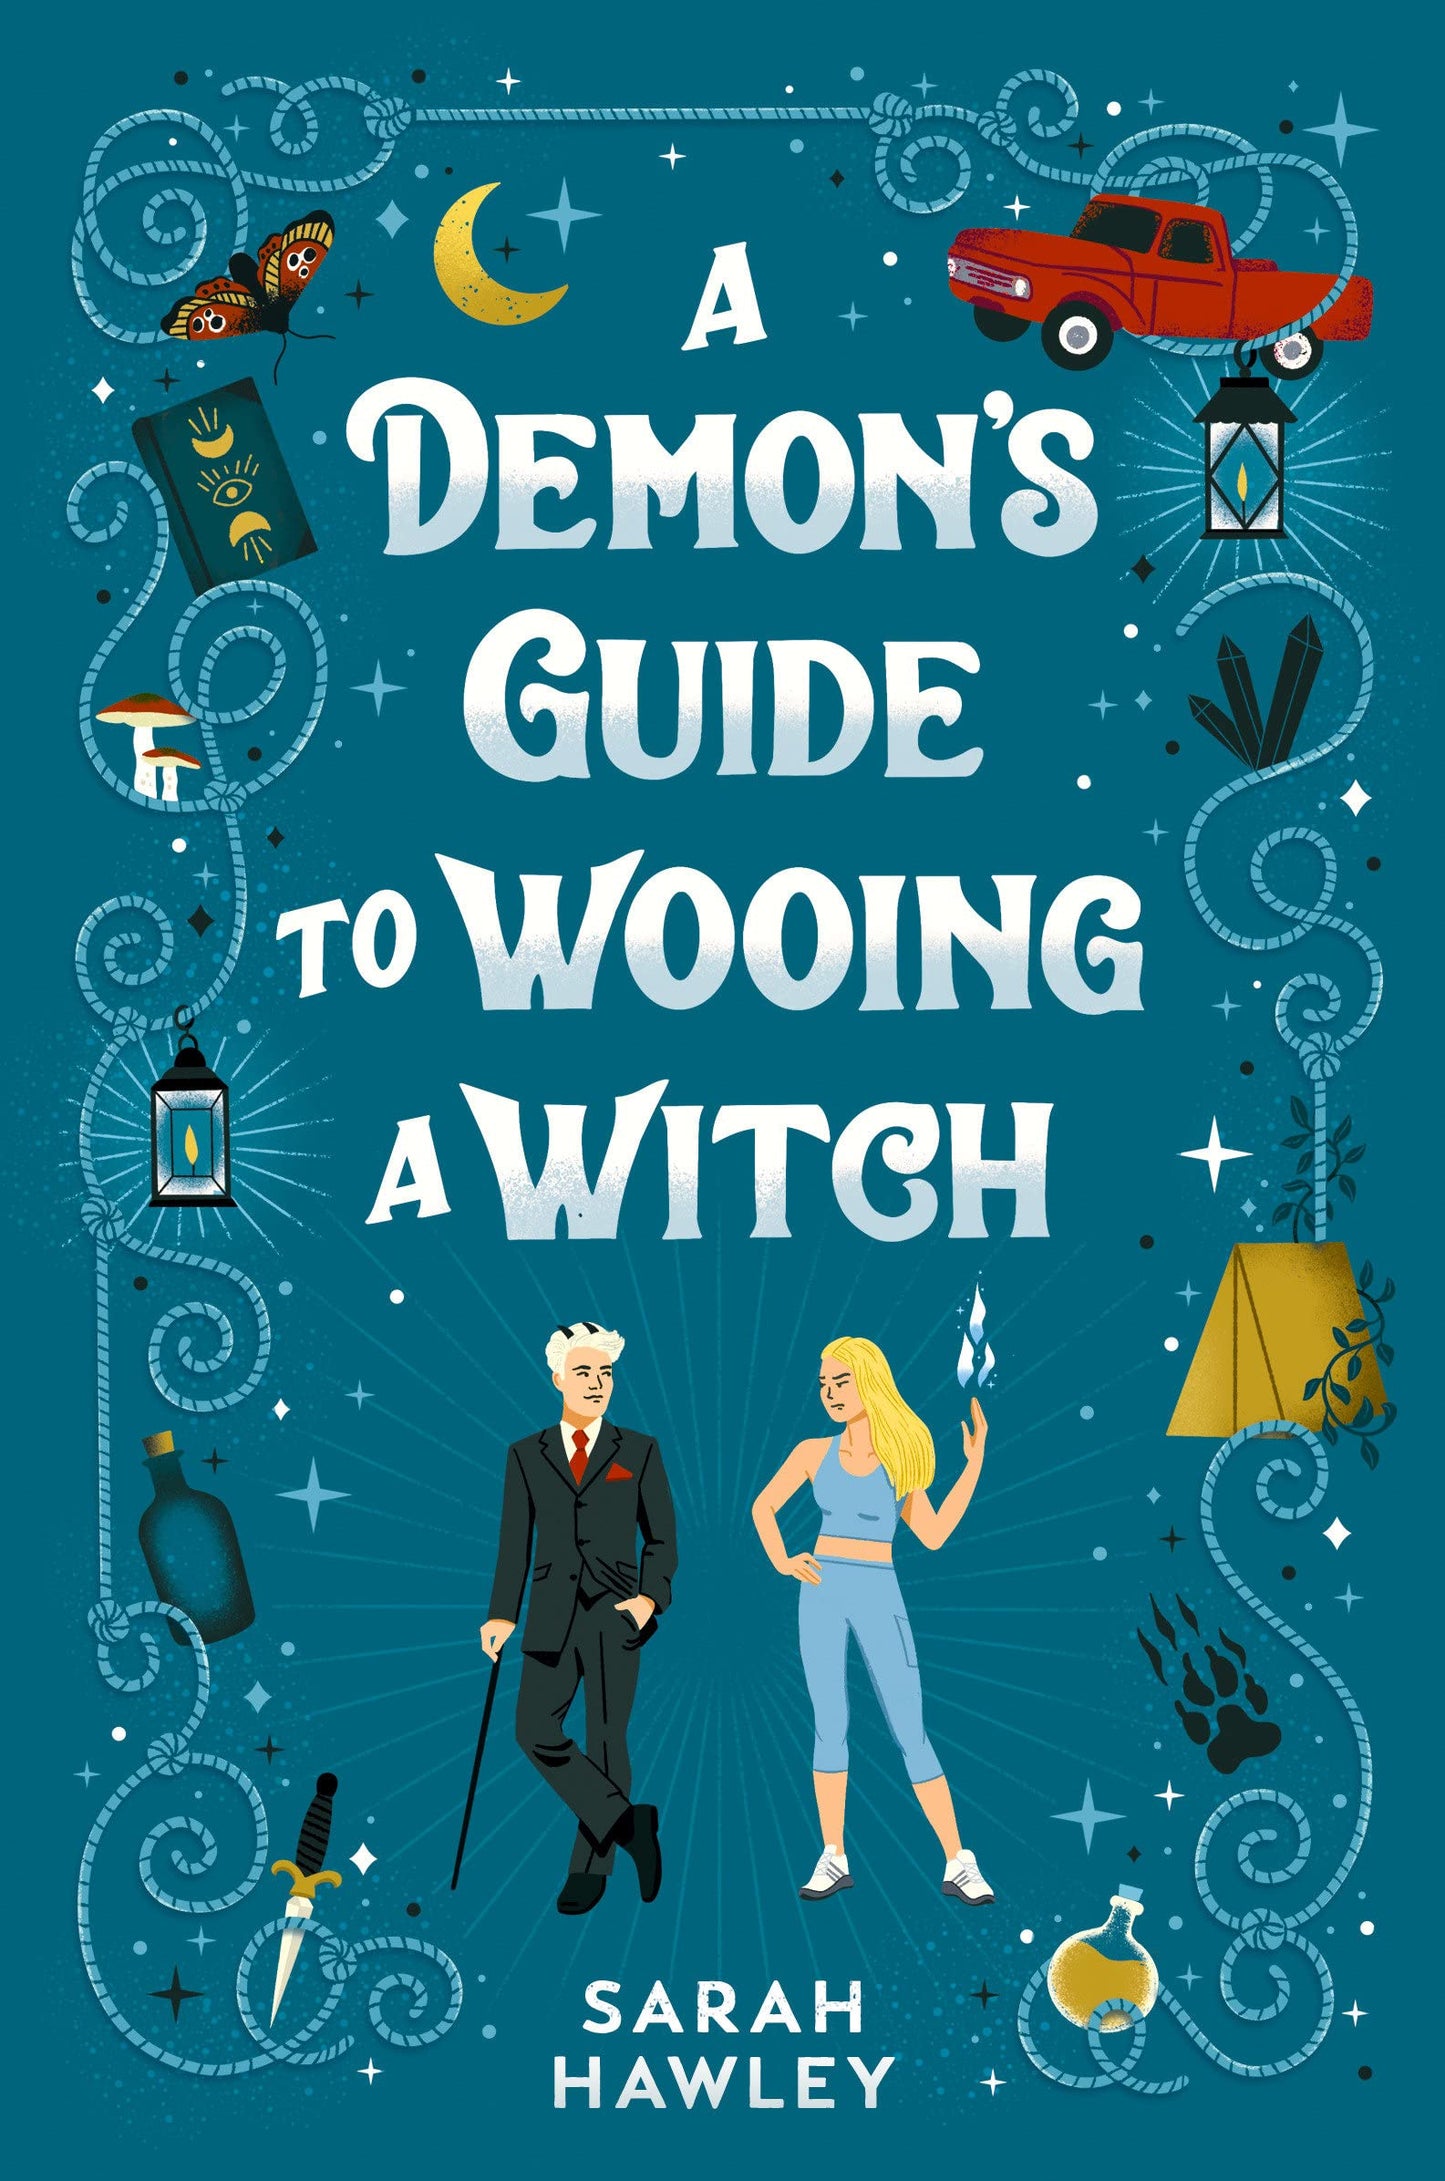 A Demon's Guide to Wooing a Witch (Glimmer Falls #2) (Paperback)